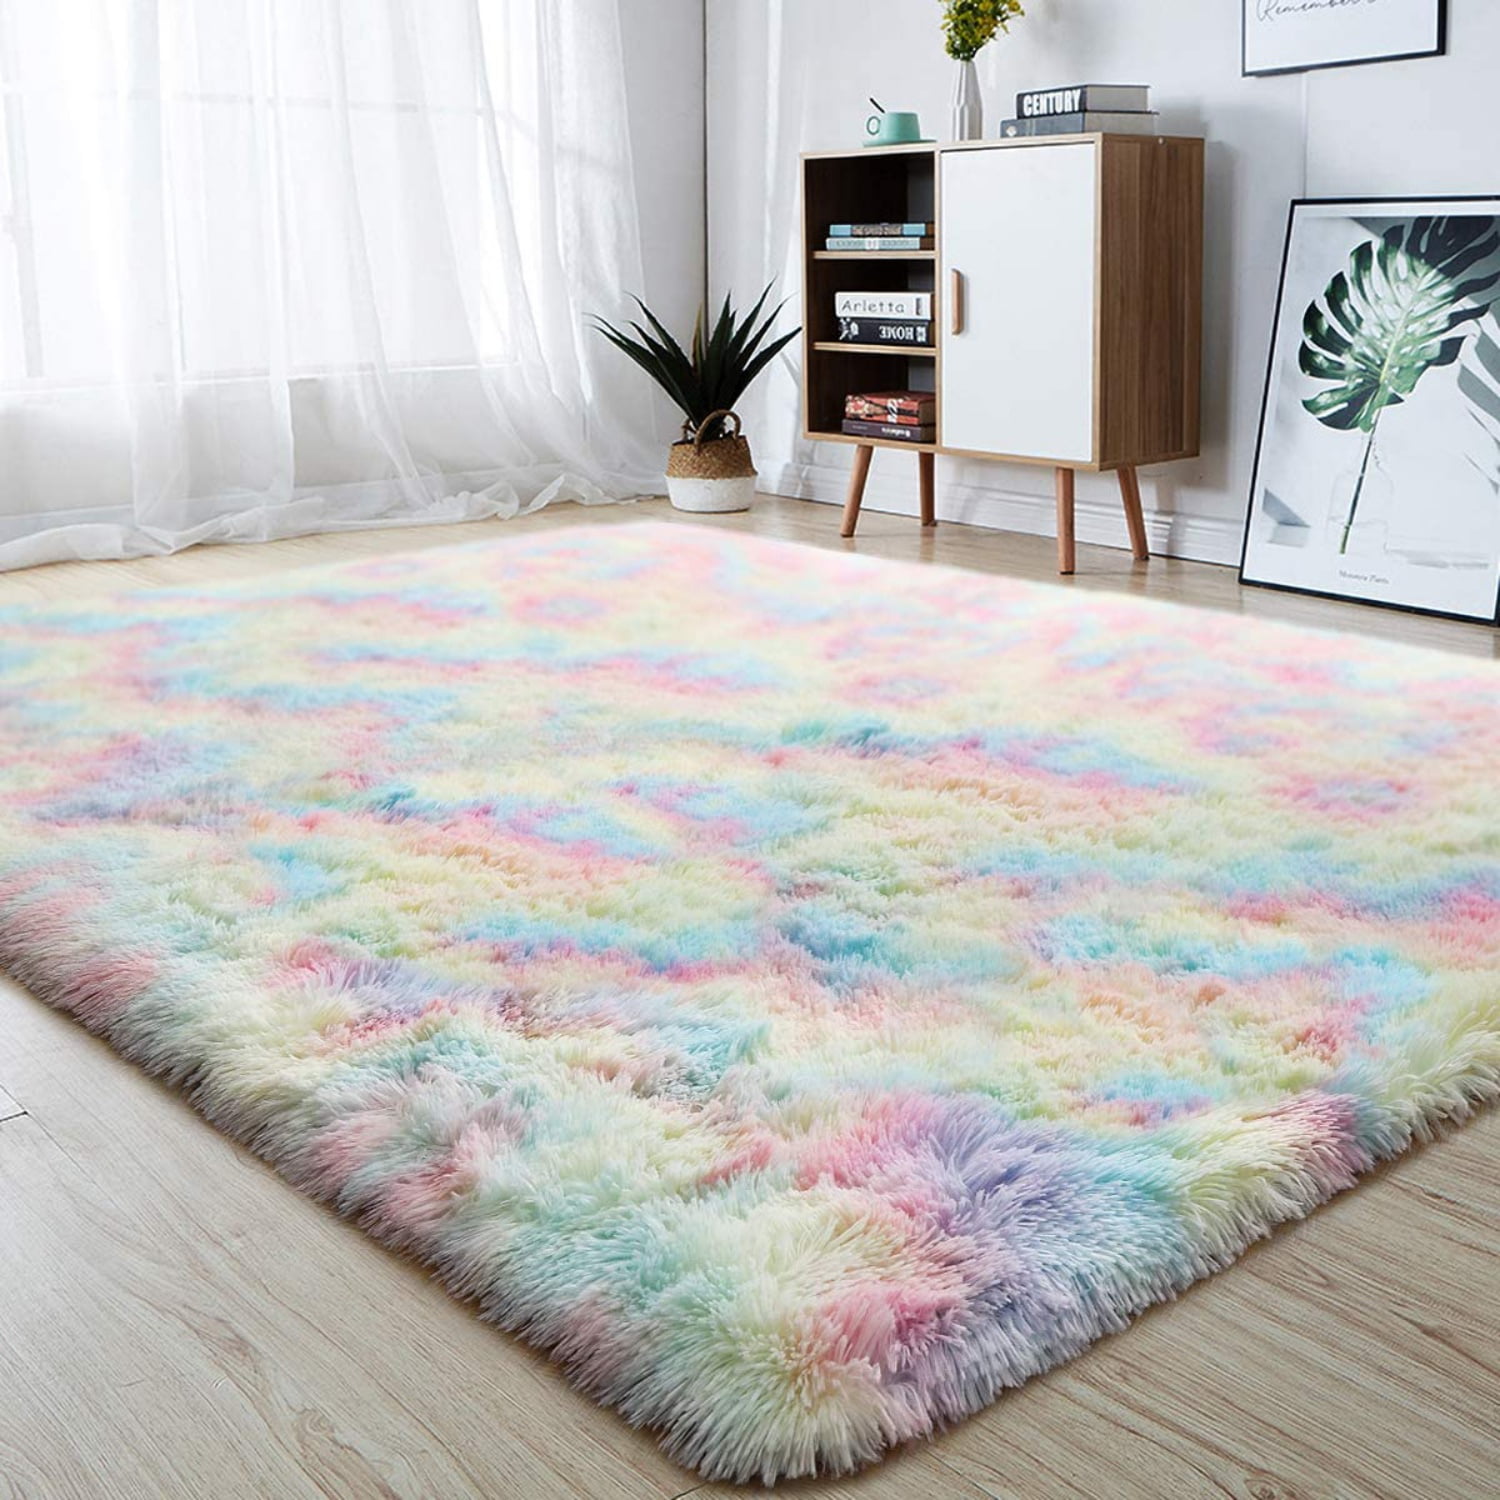 Pink Kids Rugs Girls Bedroom Carpet Thick Soft Children Animal Mat Small Large 